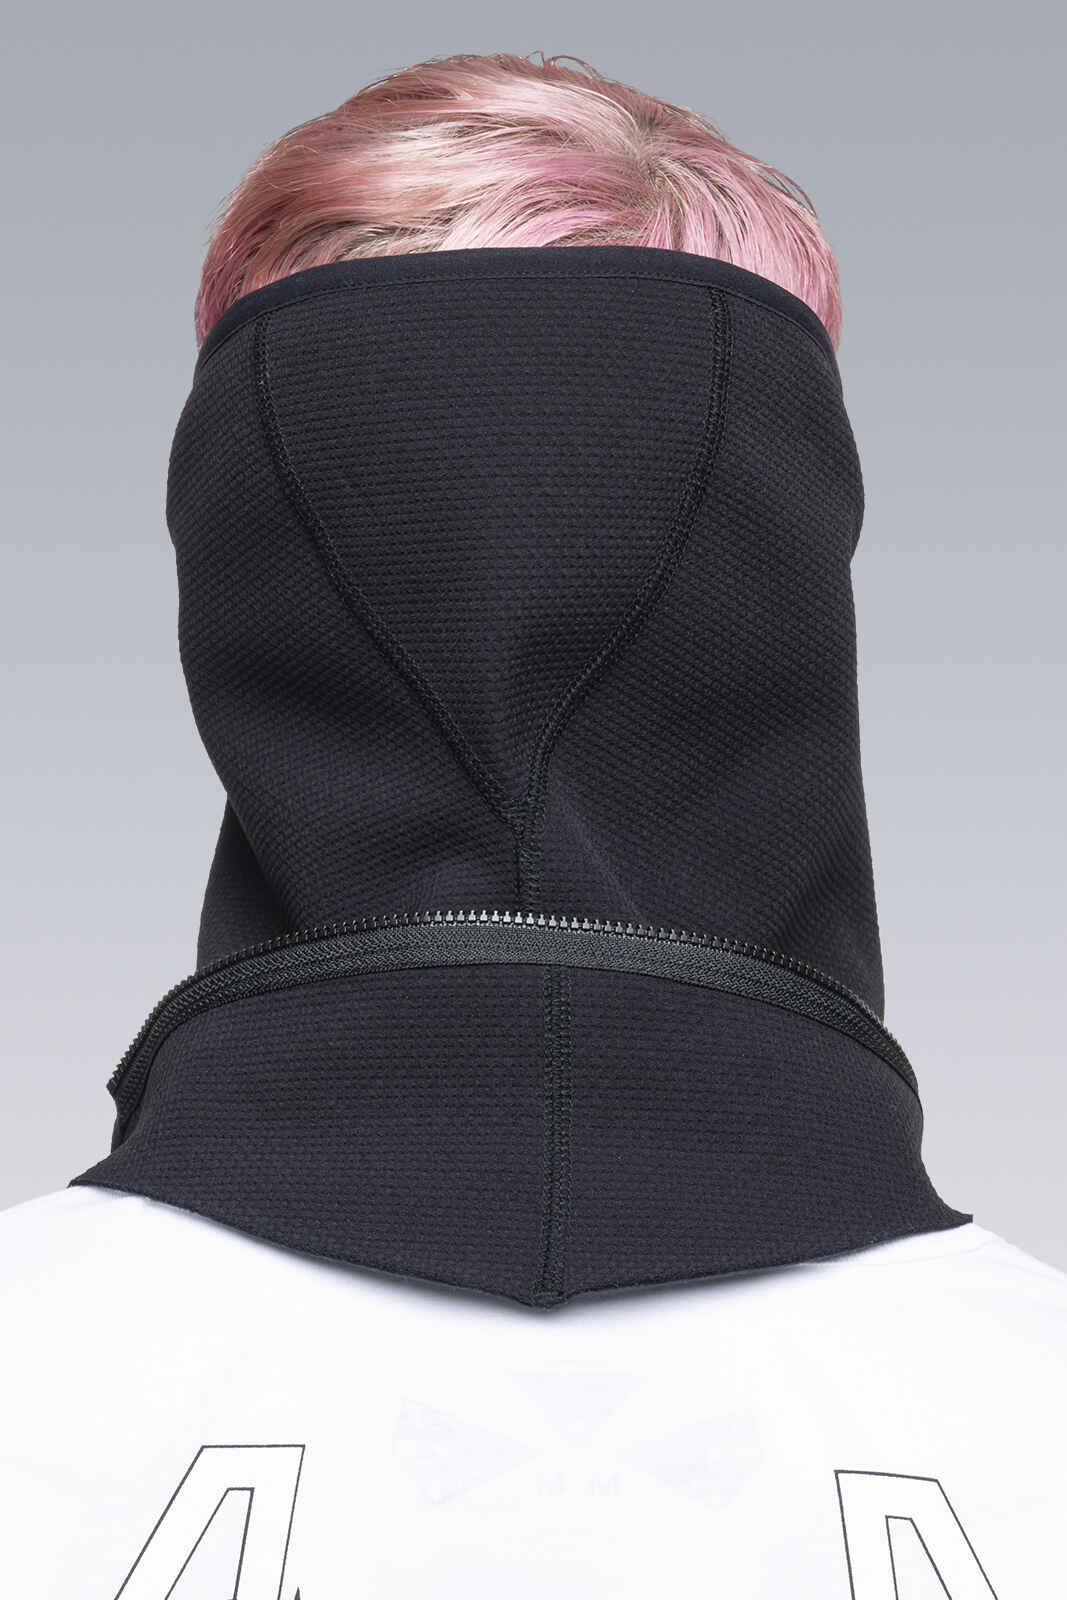 NG4-SS schoeller 3XDRY WB-400 Zip Neck Gaiter Black – NOMAD